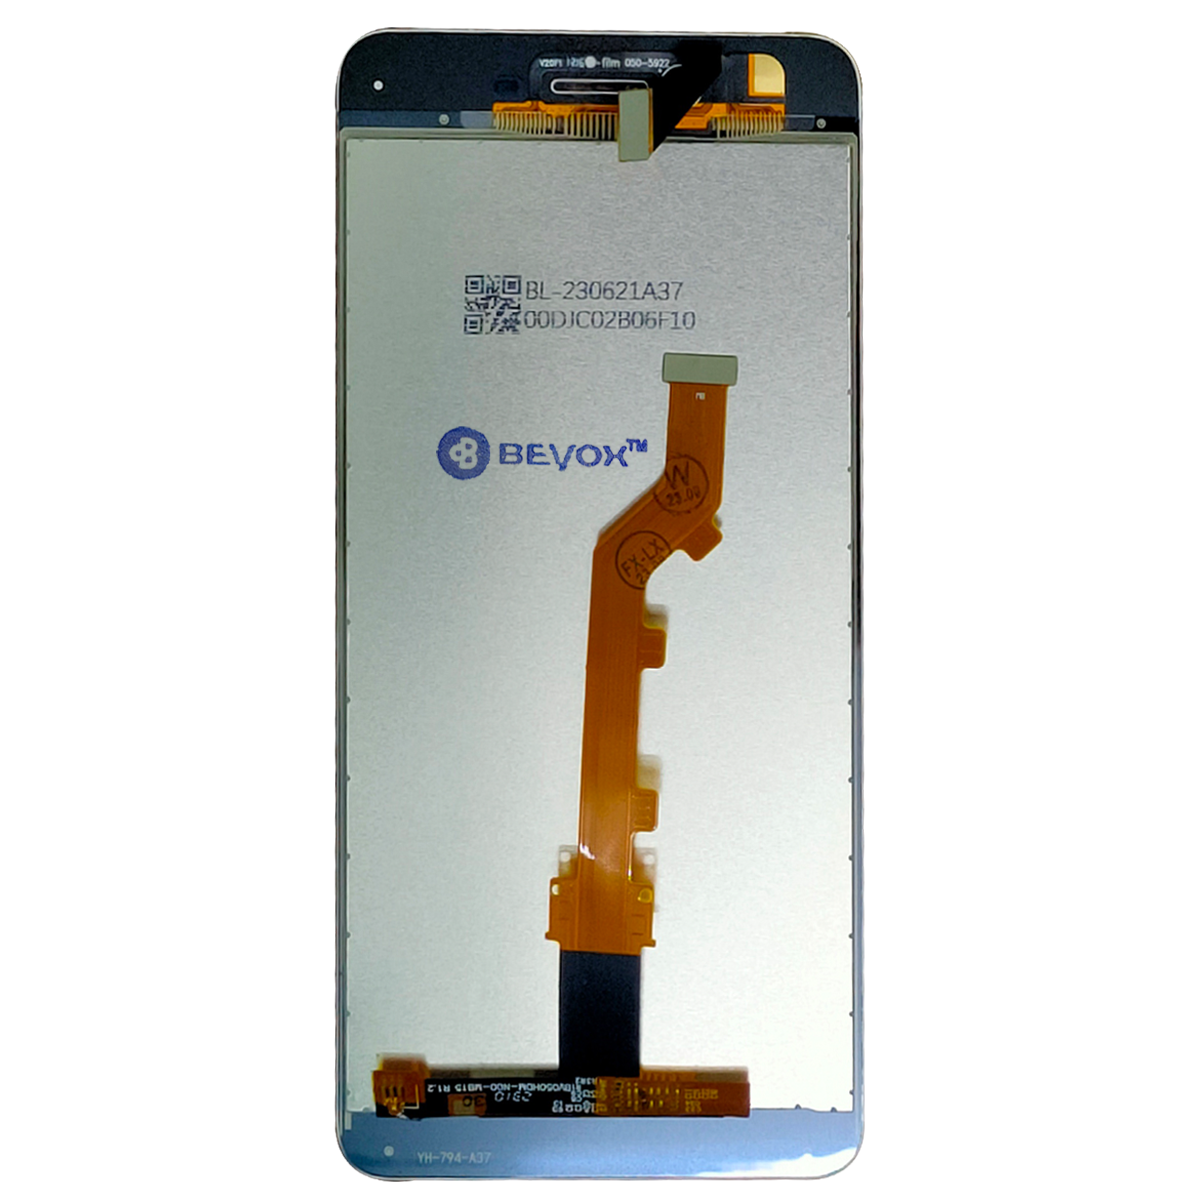 Beyox Combo LCD Display for Oppo A37